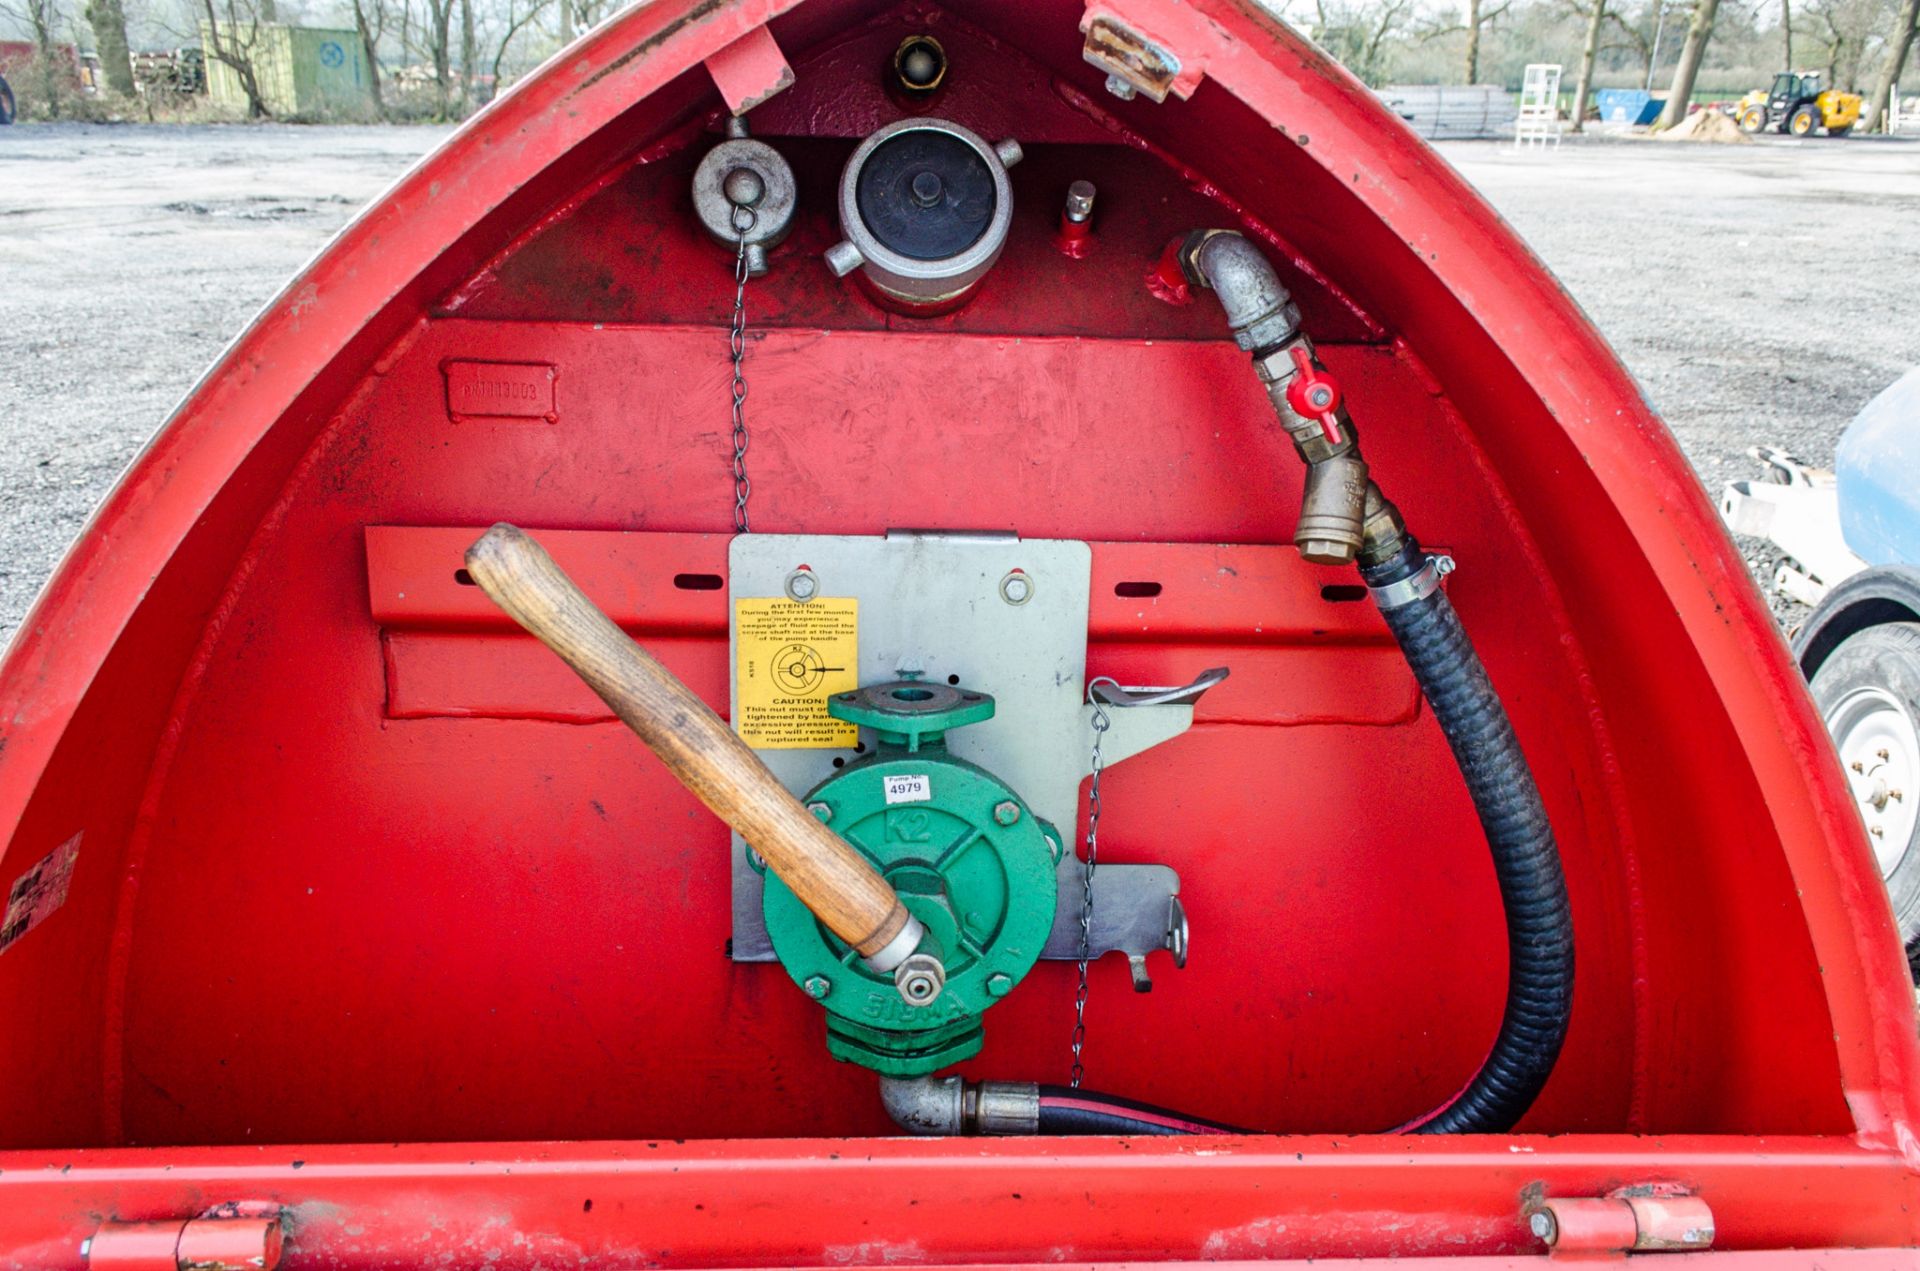 Western Abbi 950 litre fast tow mobile bunded fuel bowser c/w manual pump 1402-0810 ** No hose or - Image 3 of 3